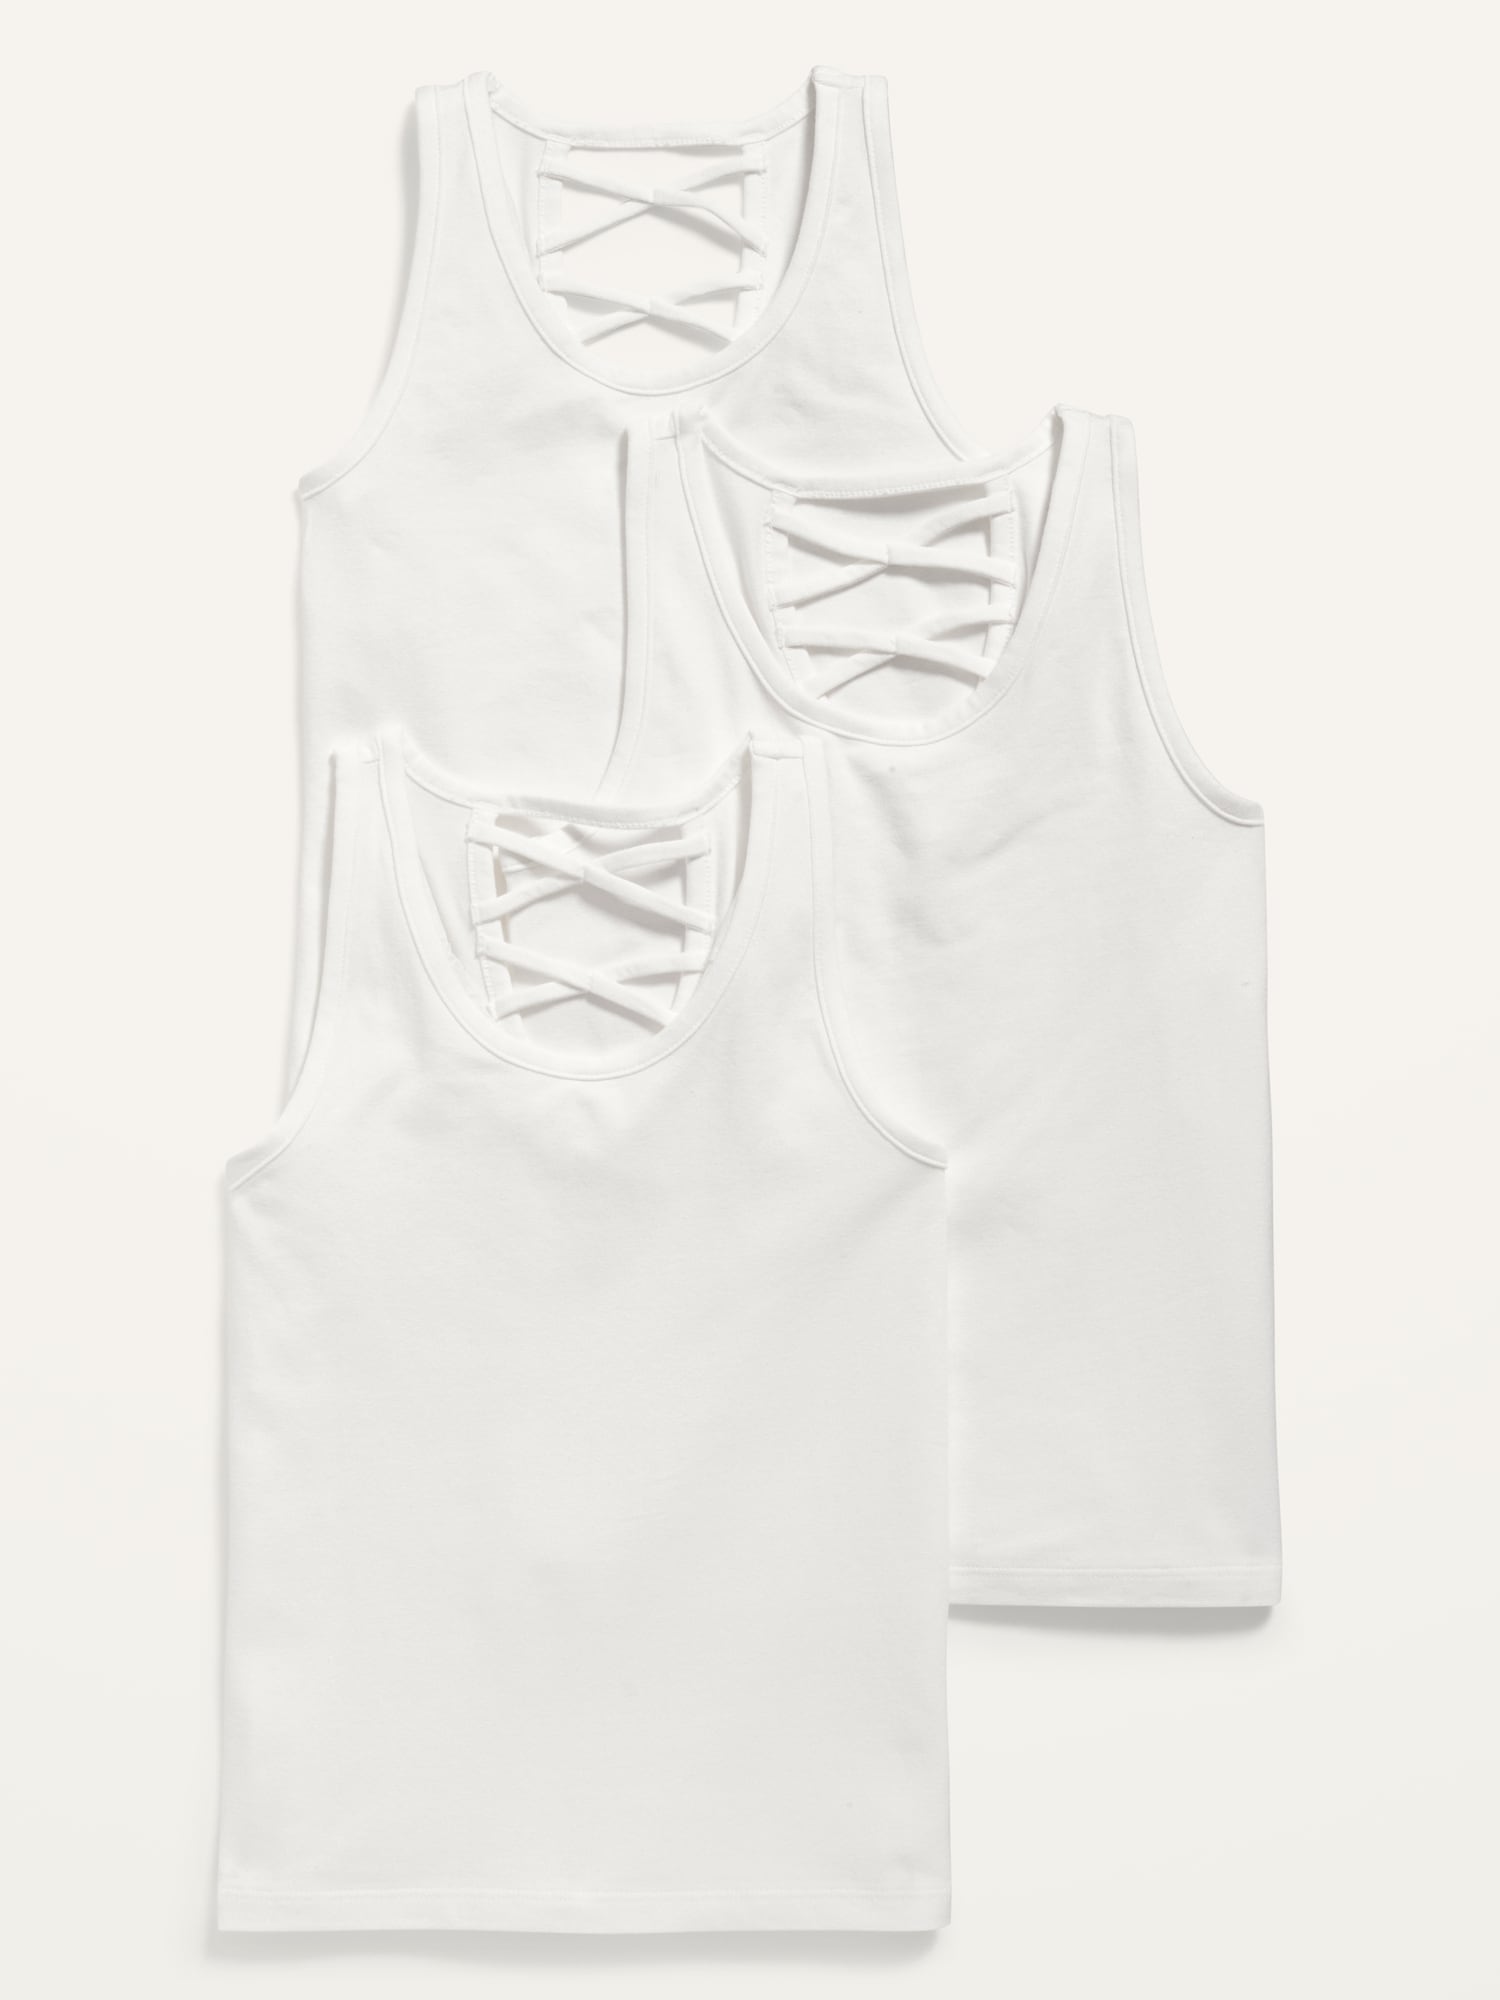 Tank Top 3-Pack for Toddler Girls